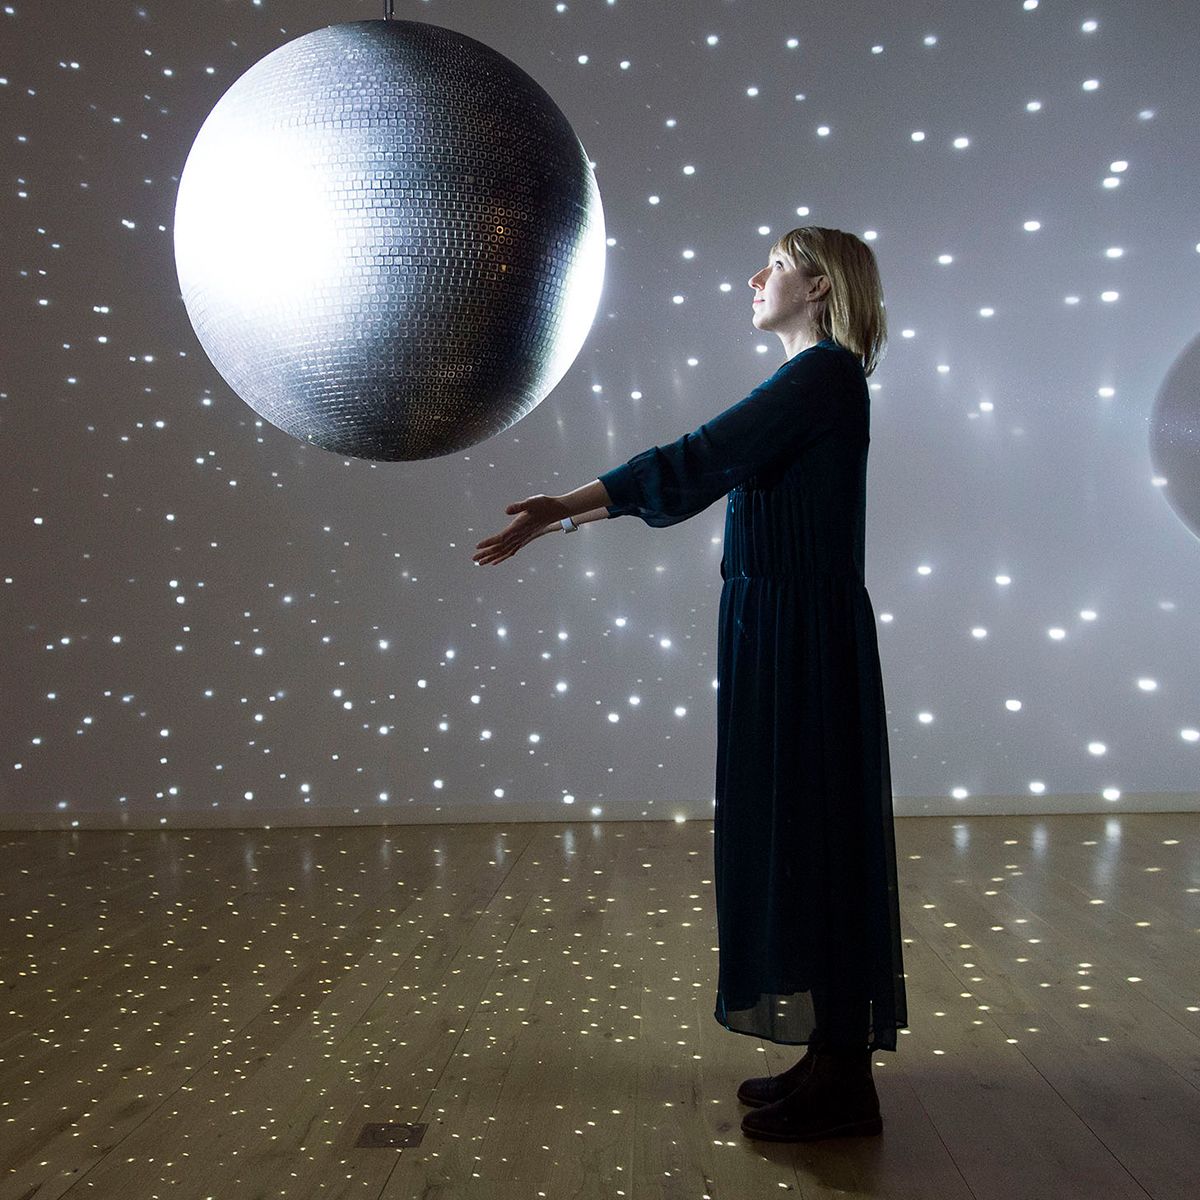 A photo of a female artist in a long dress with her arms outstretched in front of a large disco ball